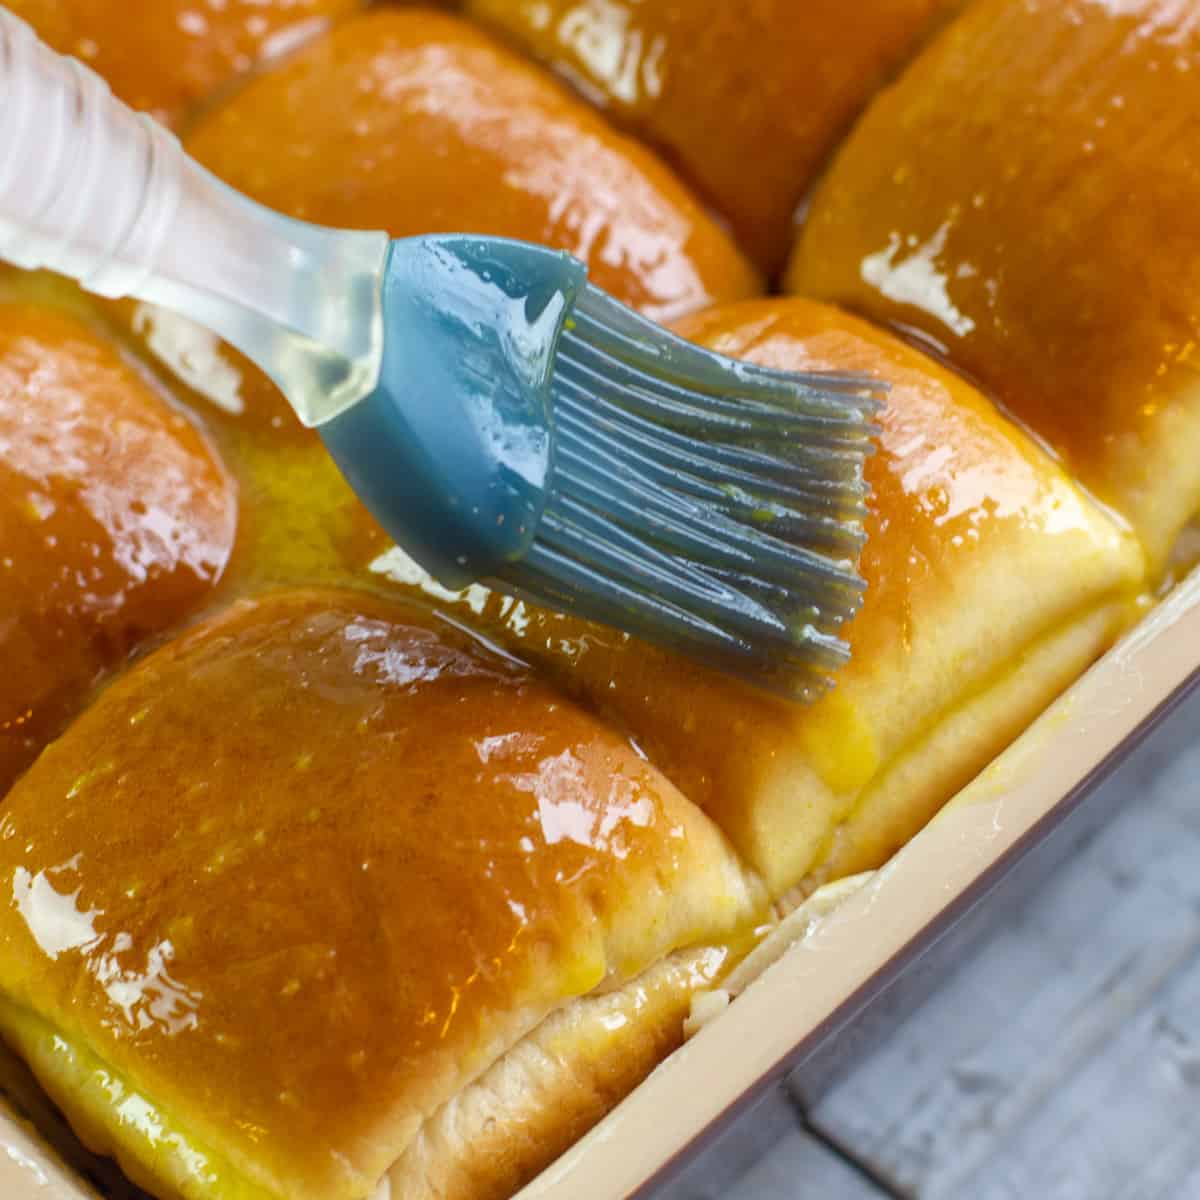 A pastry brush spreading melted butter on slider buns.